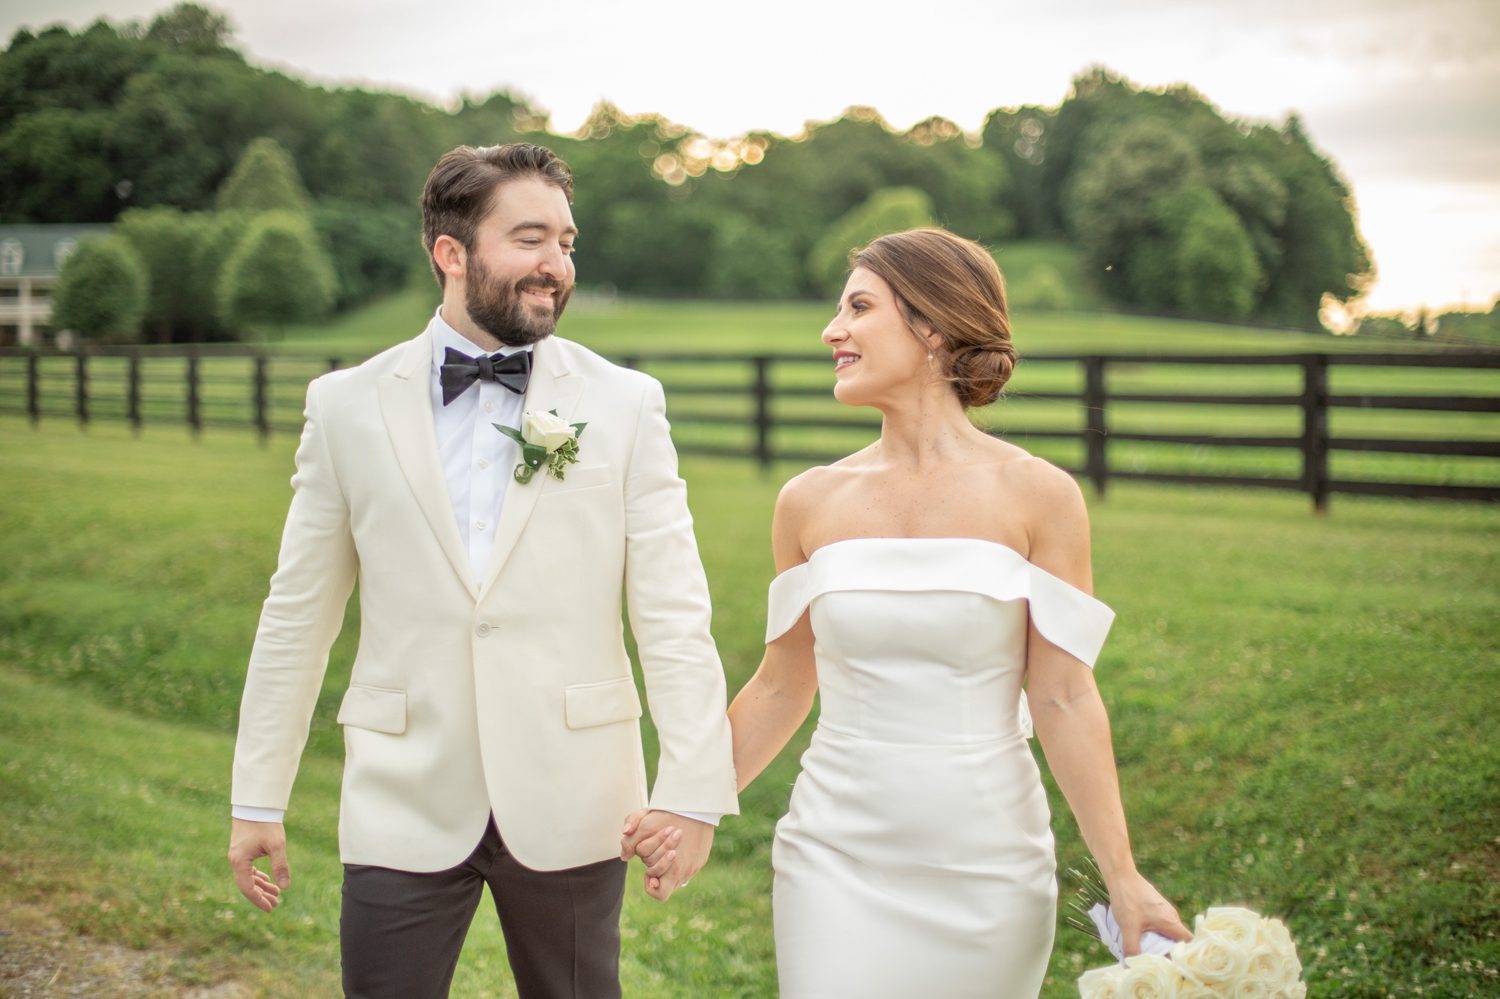 Private Estate Wedding Franklin, TN Bride and Groom Portrait in Green Field with Fence